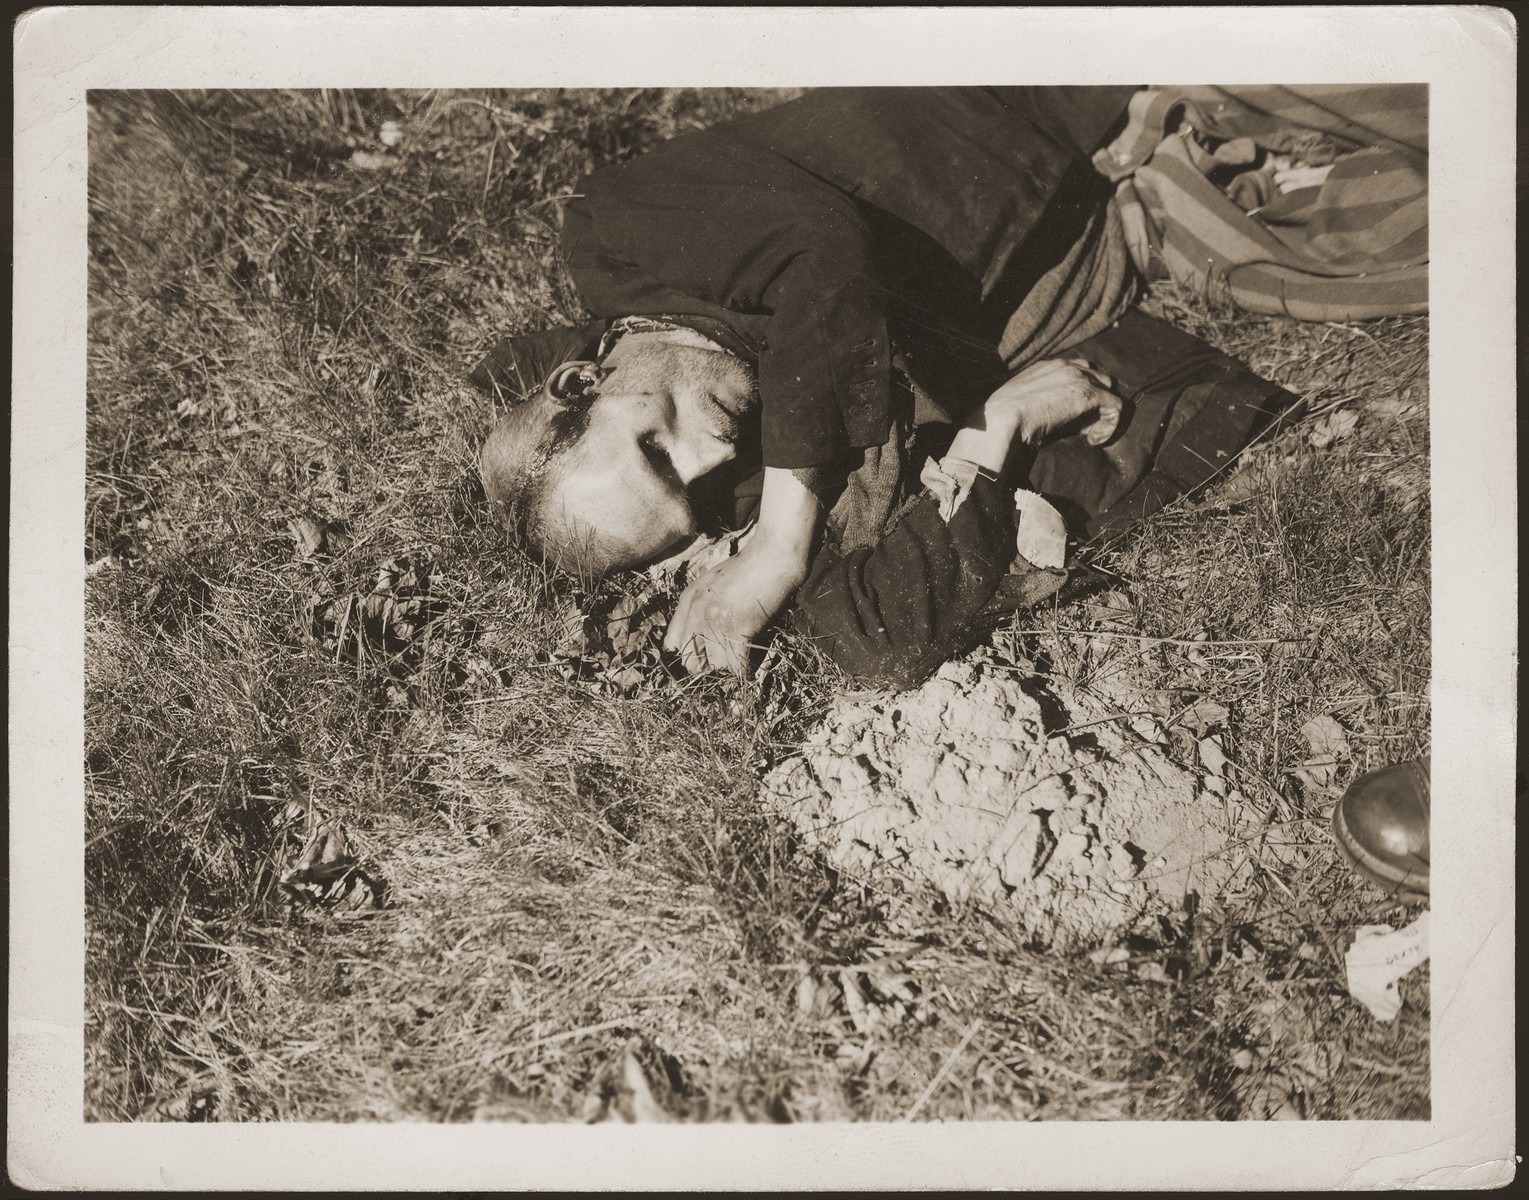 The body of a prisoner shot on the road near Gardelegen.  The prisoner was shot by the SS when he was too exhausted to continue on a death march from the nearby town of Mieste.